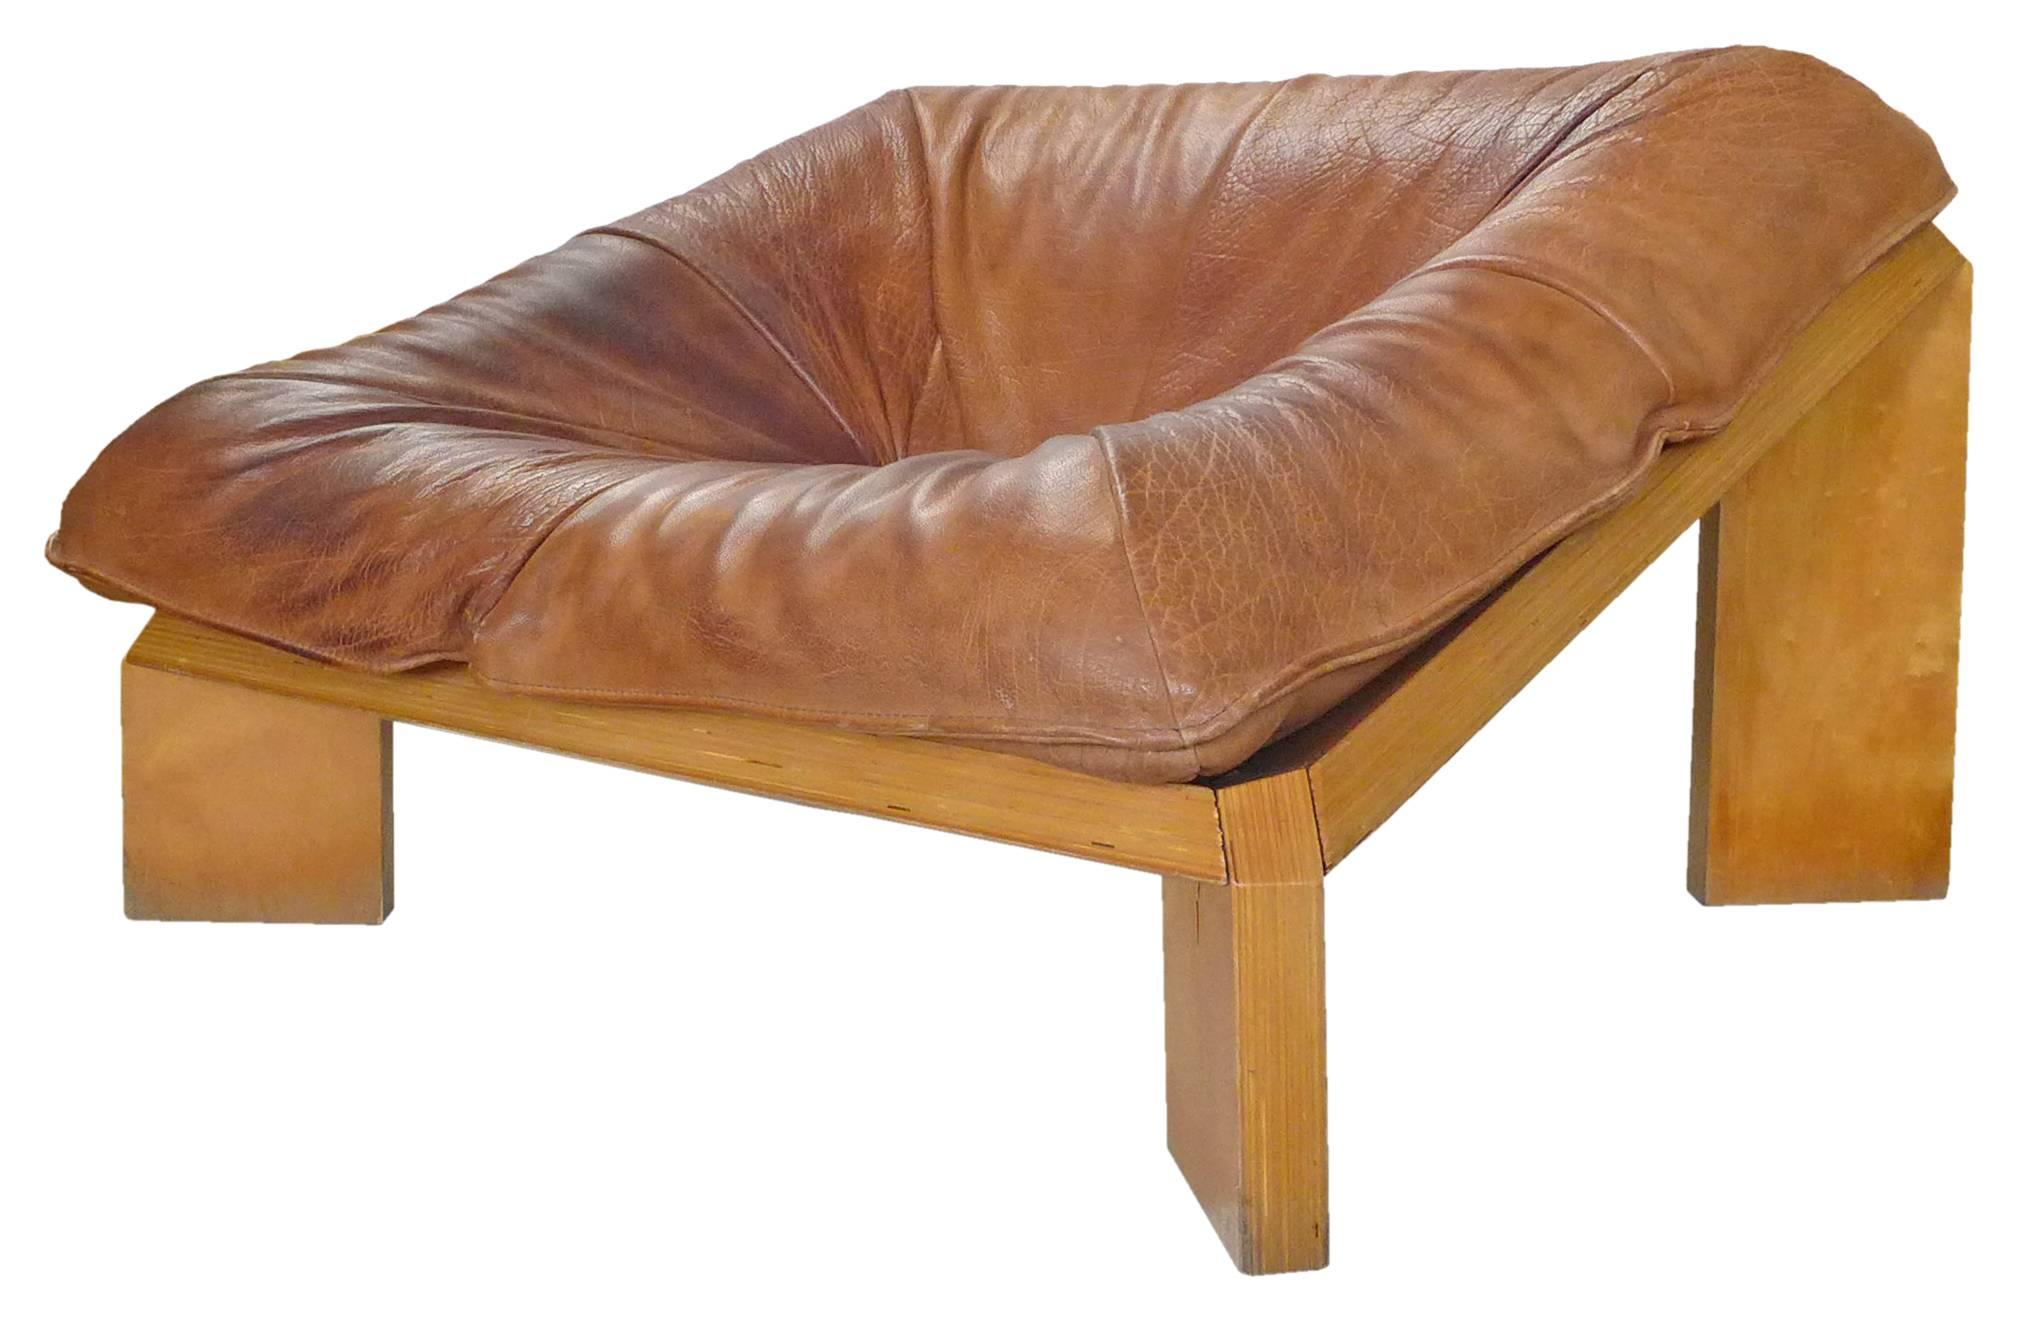 A spectacular and rare "Olso" lounge chair by Gerard Van Den Berg for Montis. An impressive, angular, architectural frame of sturdy, laminated birch cradling a single, overstuffed cushion upholstered in thick, cognac, neck-leather (a